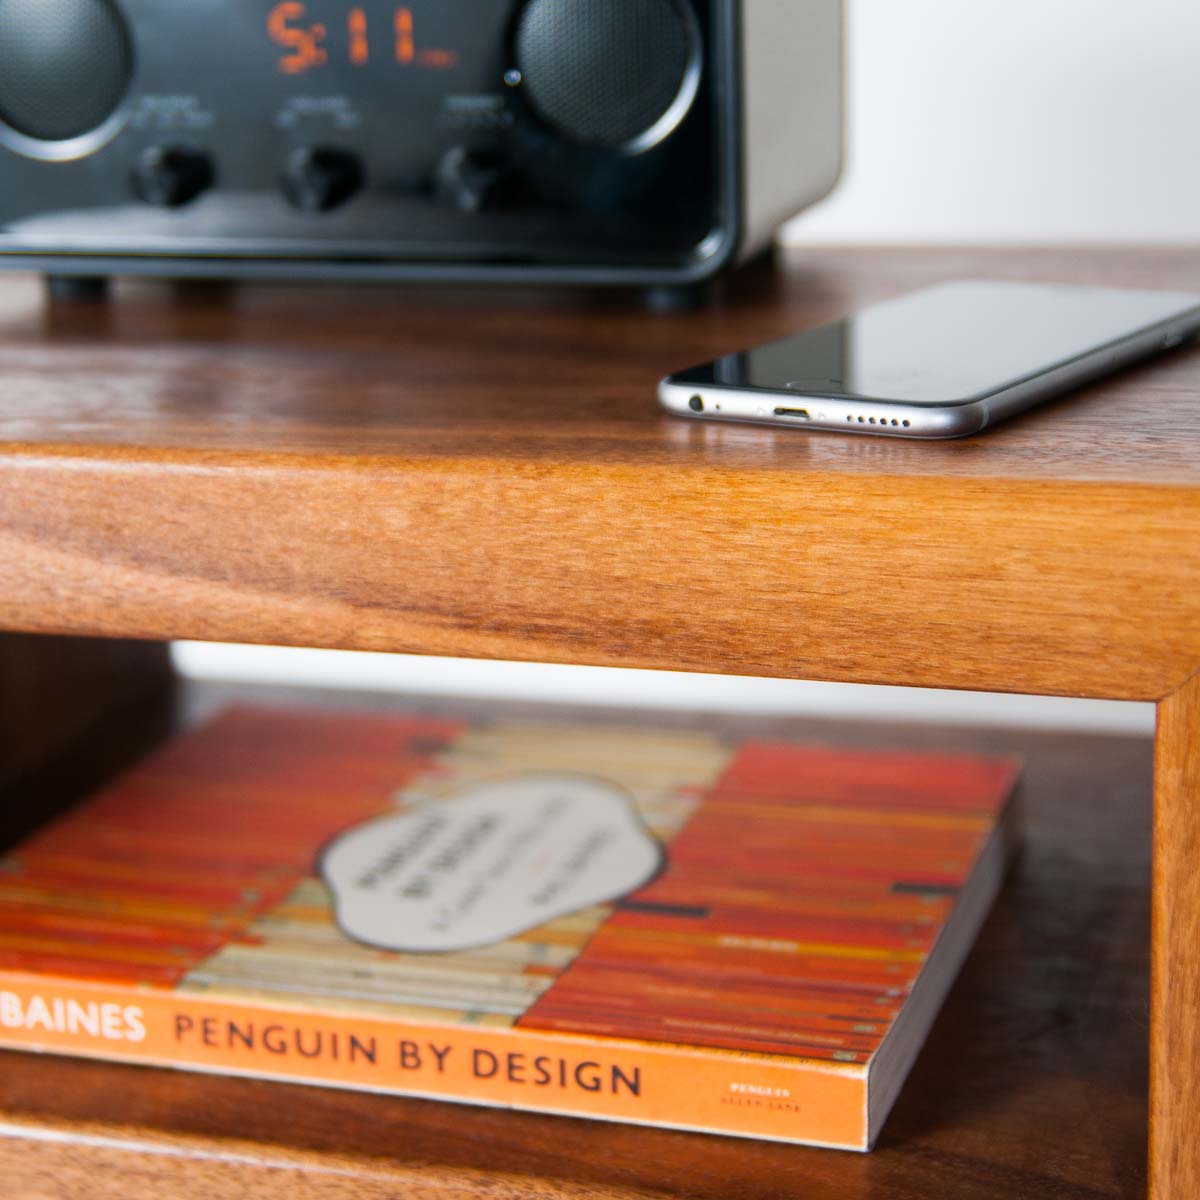 Bedside table, with phone and book